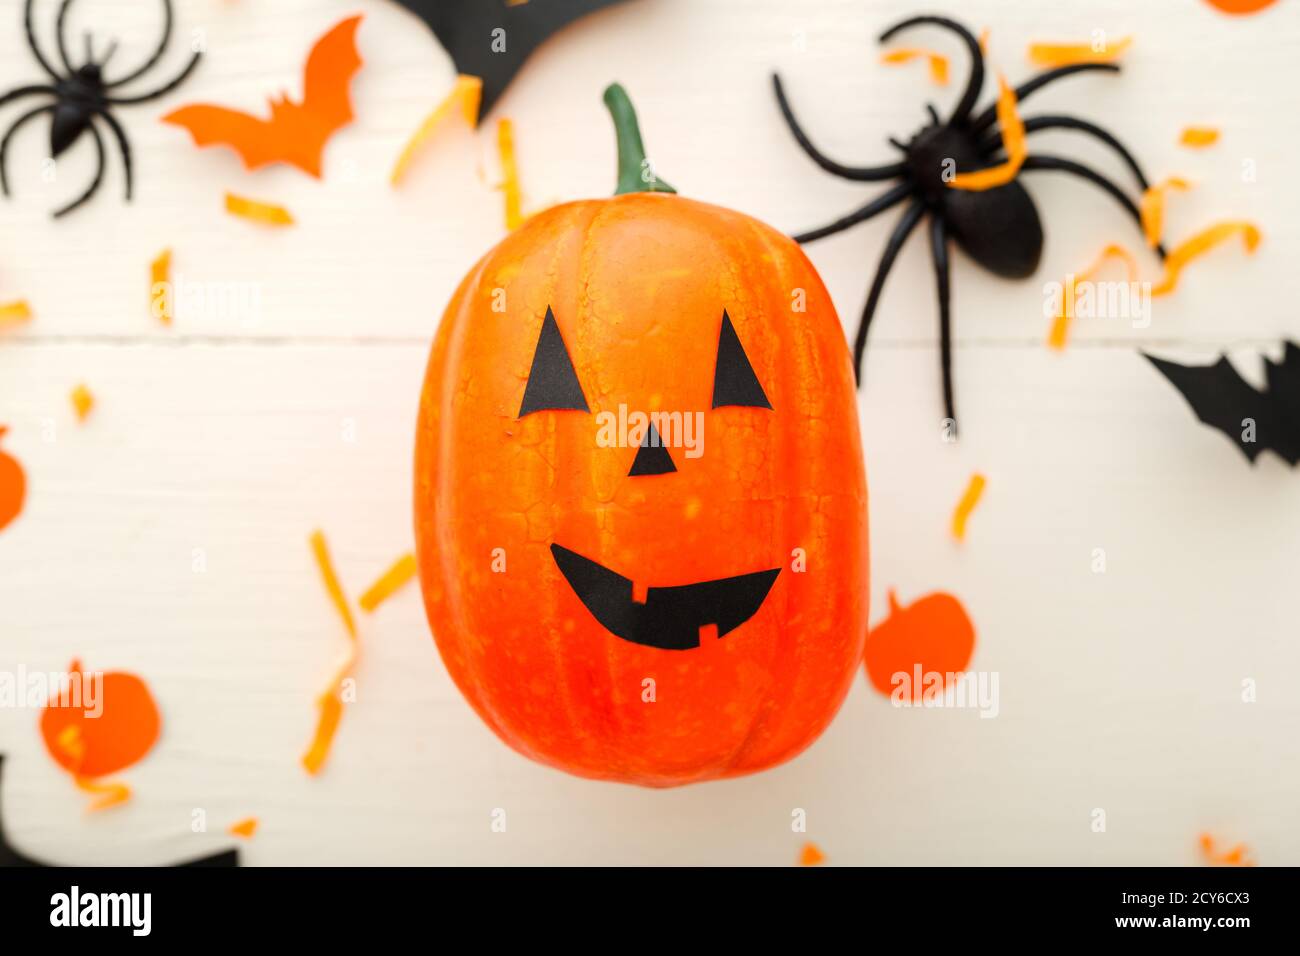 Halloween background with jack-o'-lanter, paper bats, spiders, confetti on white wooden background. Halloween holiday decorations. Flat lay, top view Stock Photo